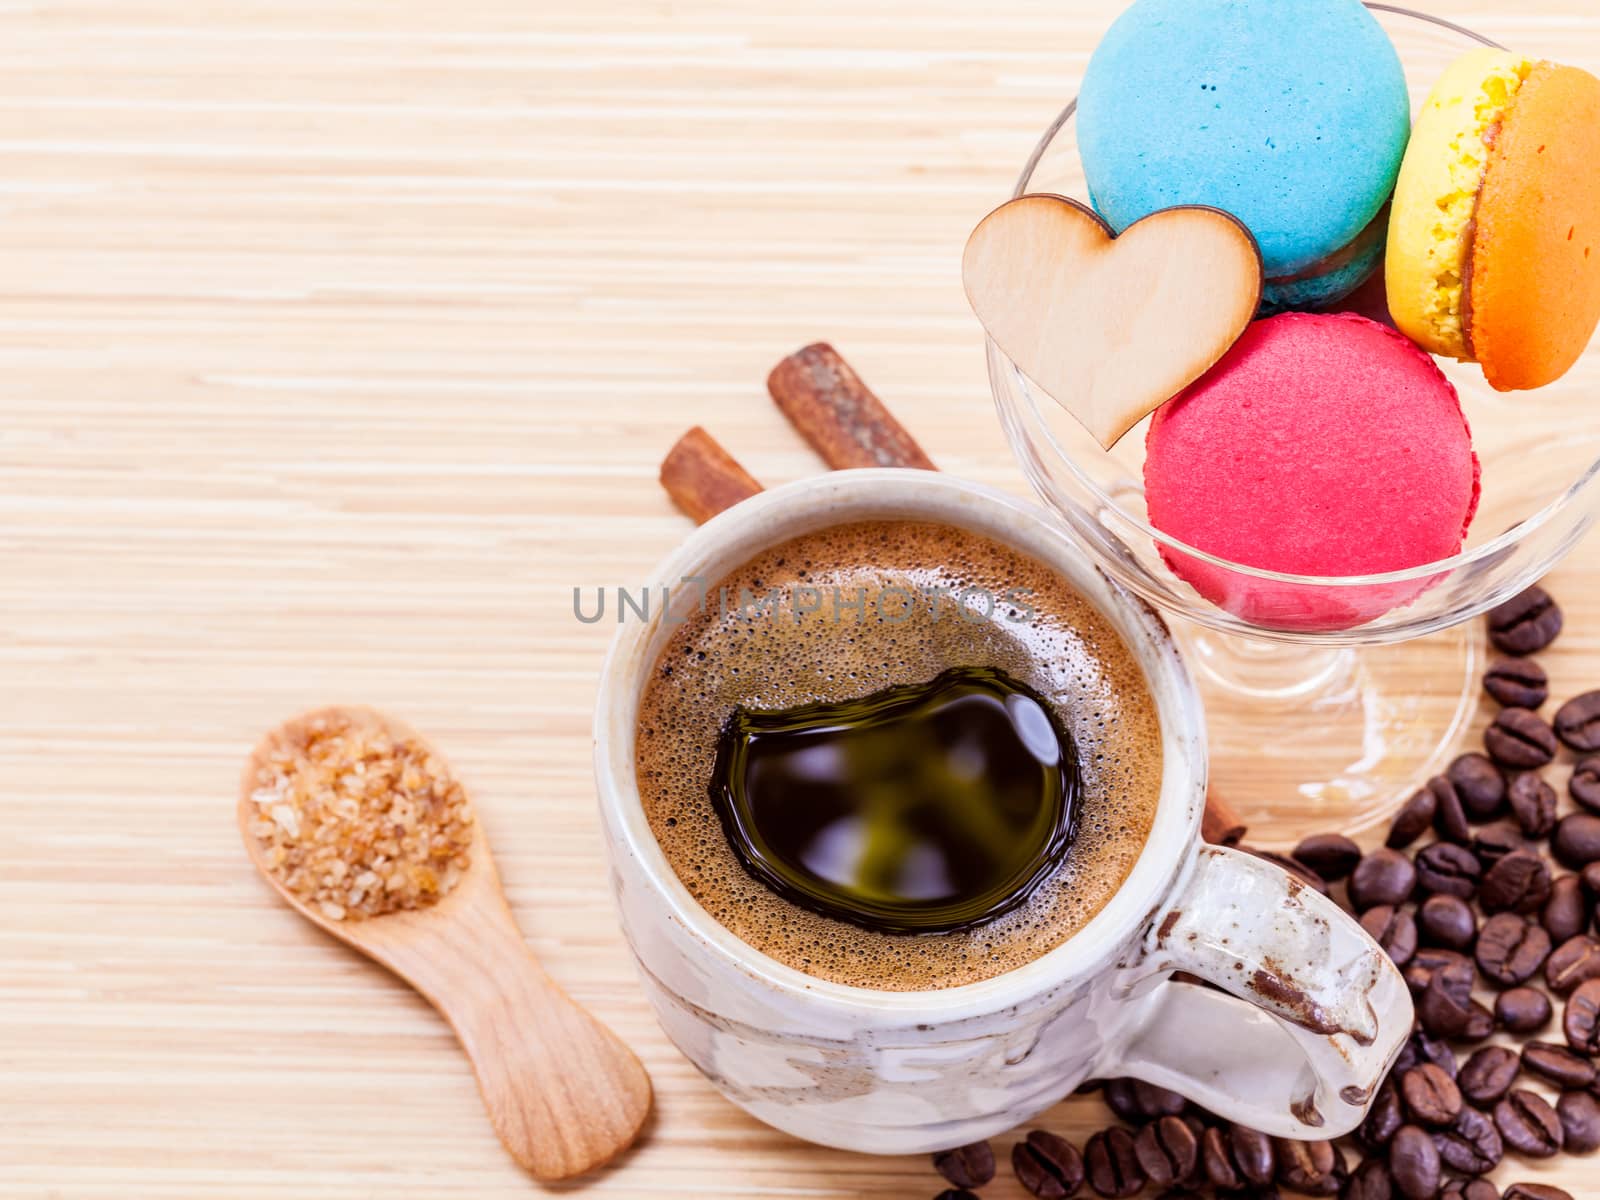 French colourful macaroons and a cup of coffee. - Macro shot wit by kerdkanno